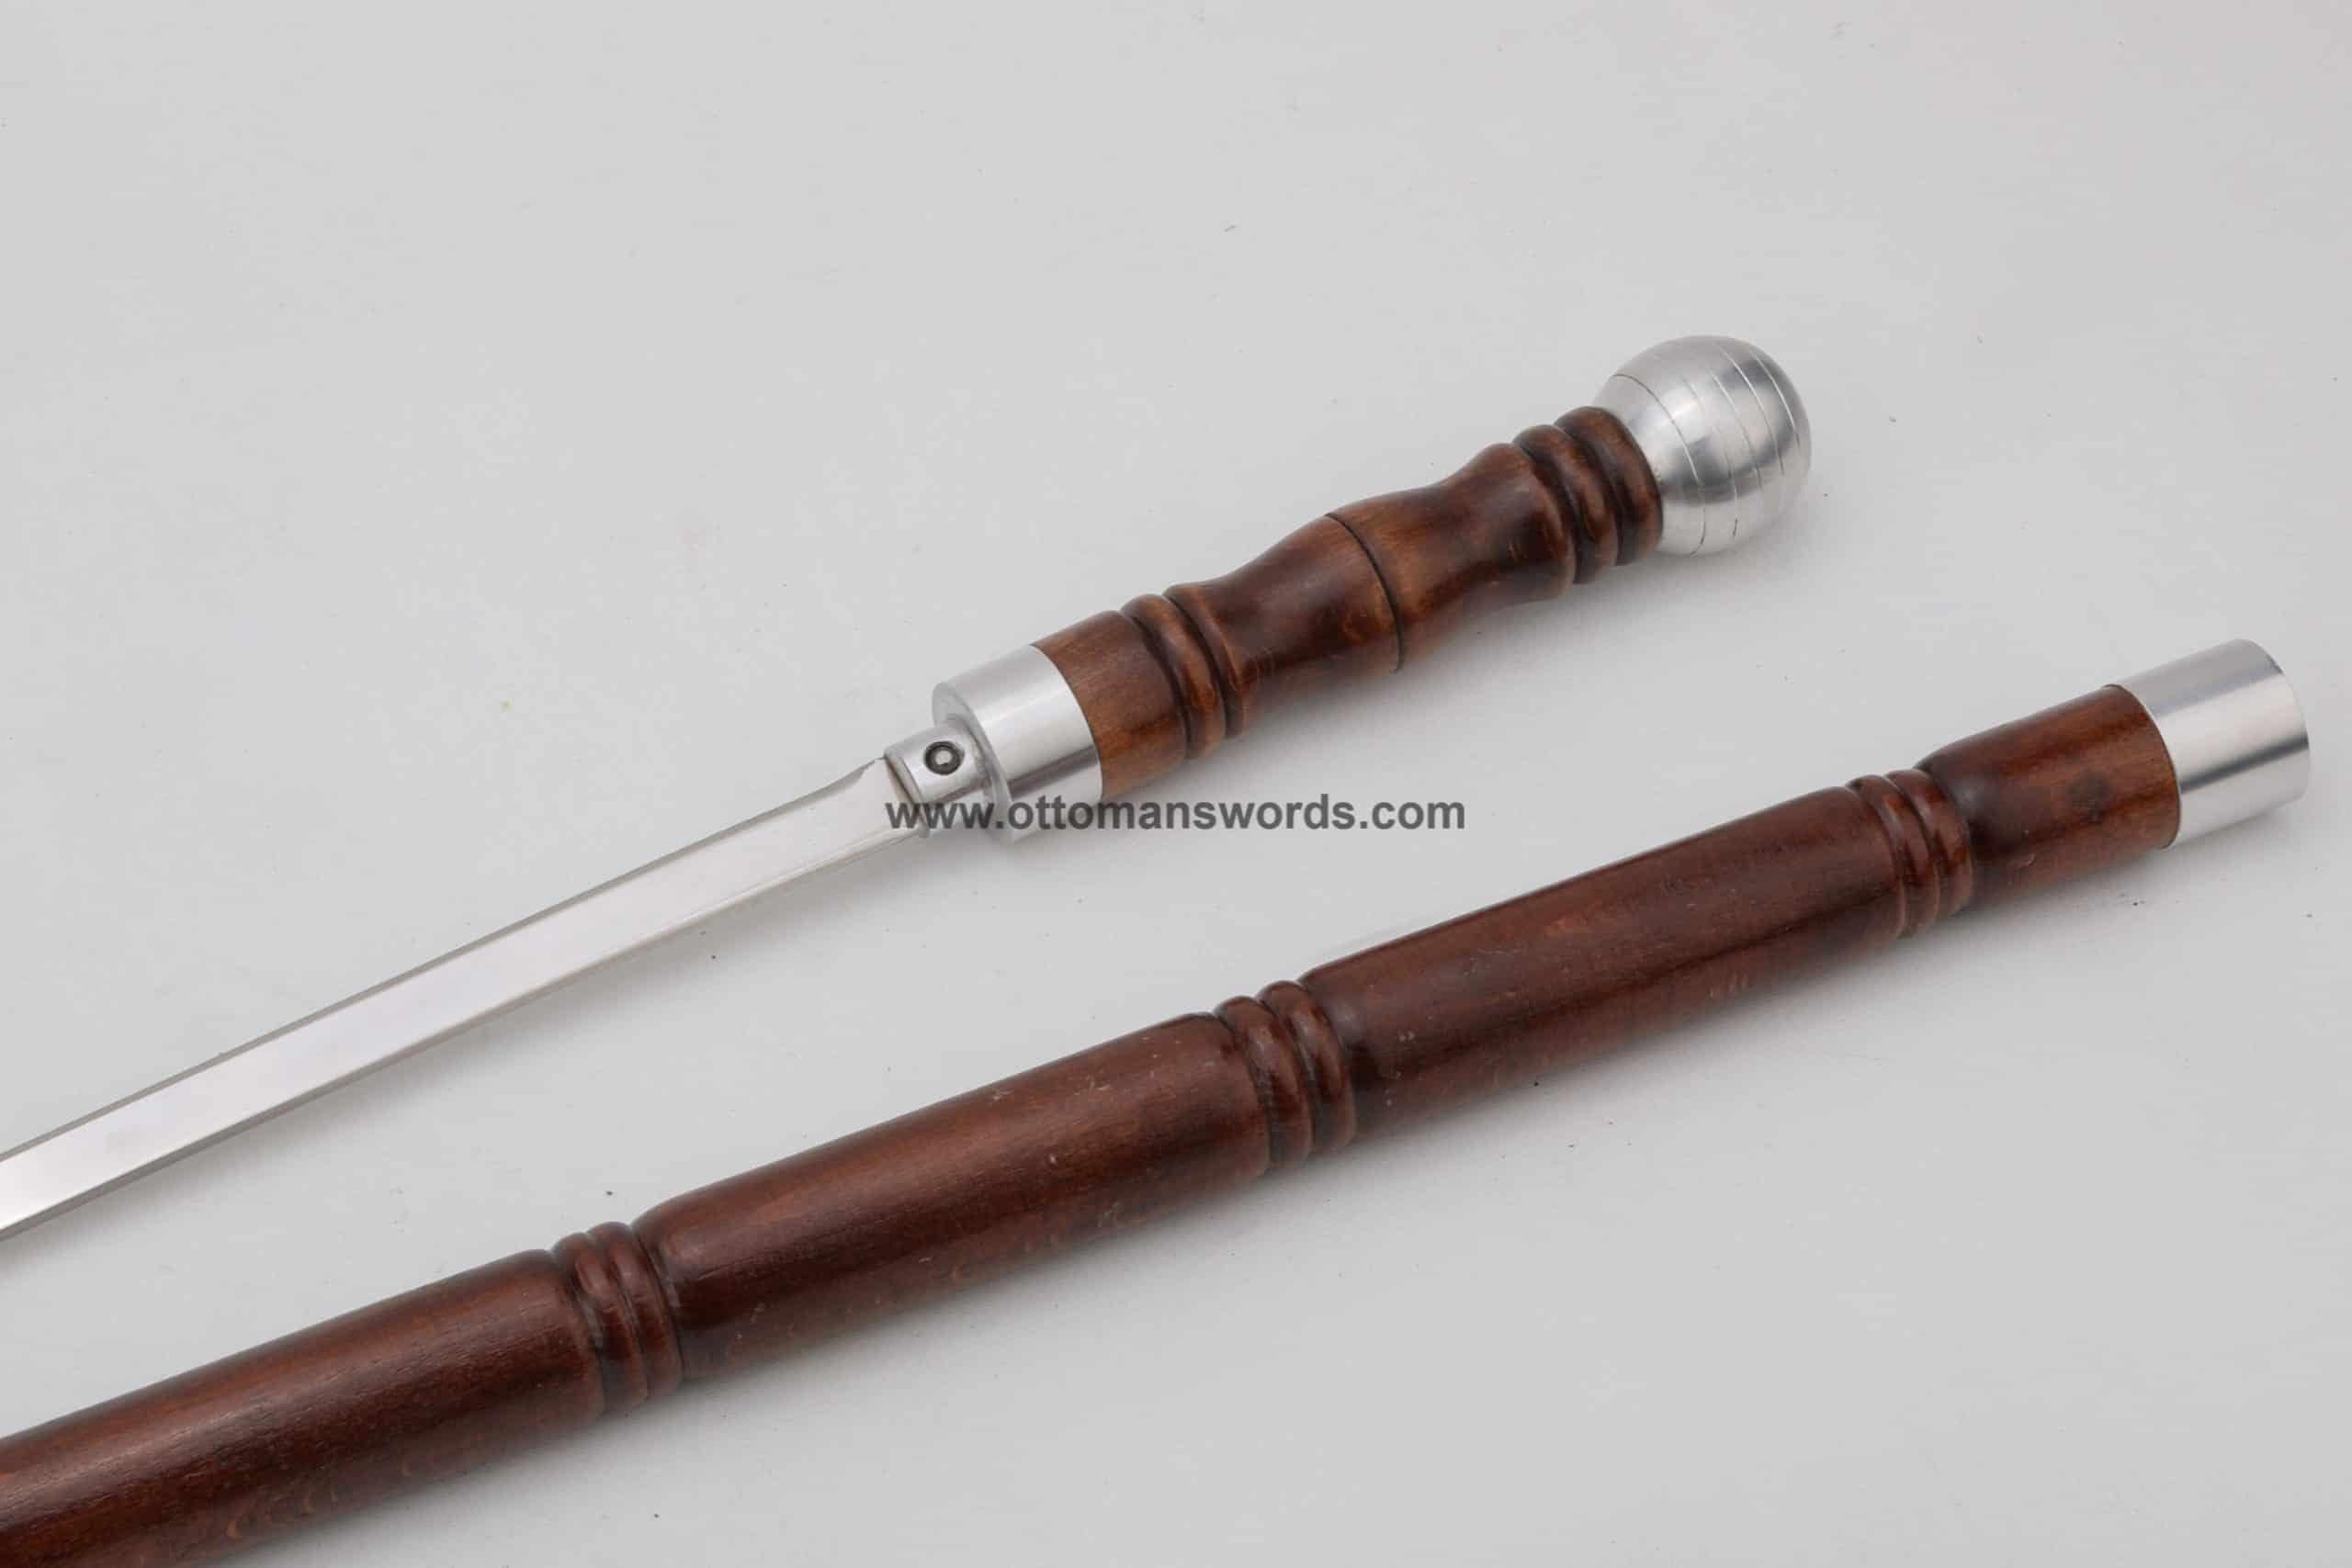 cold steel cane